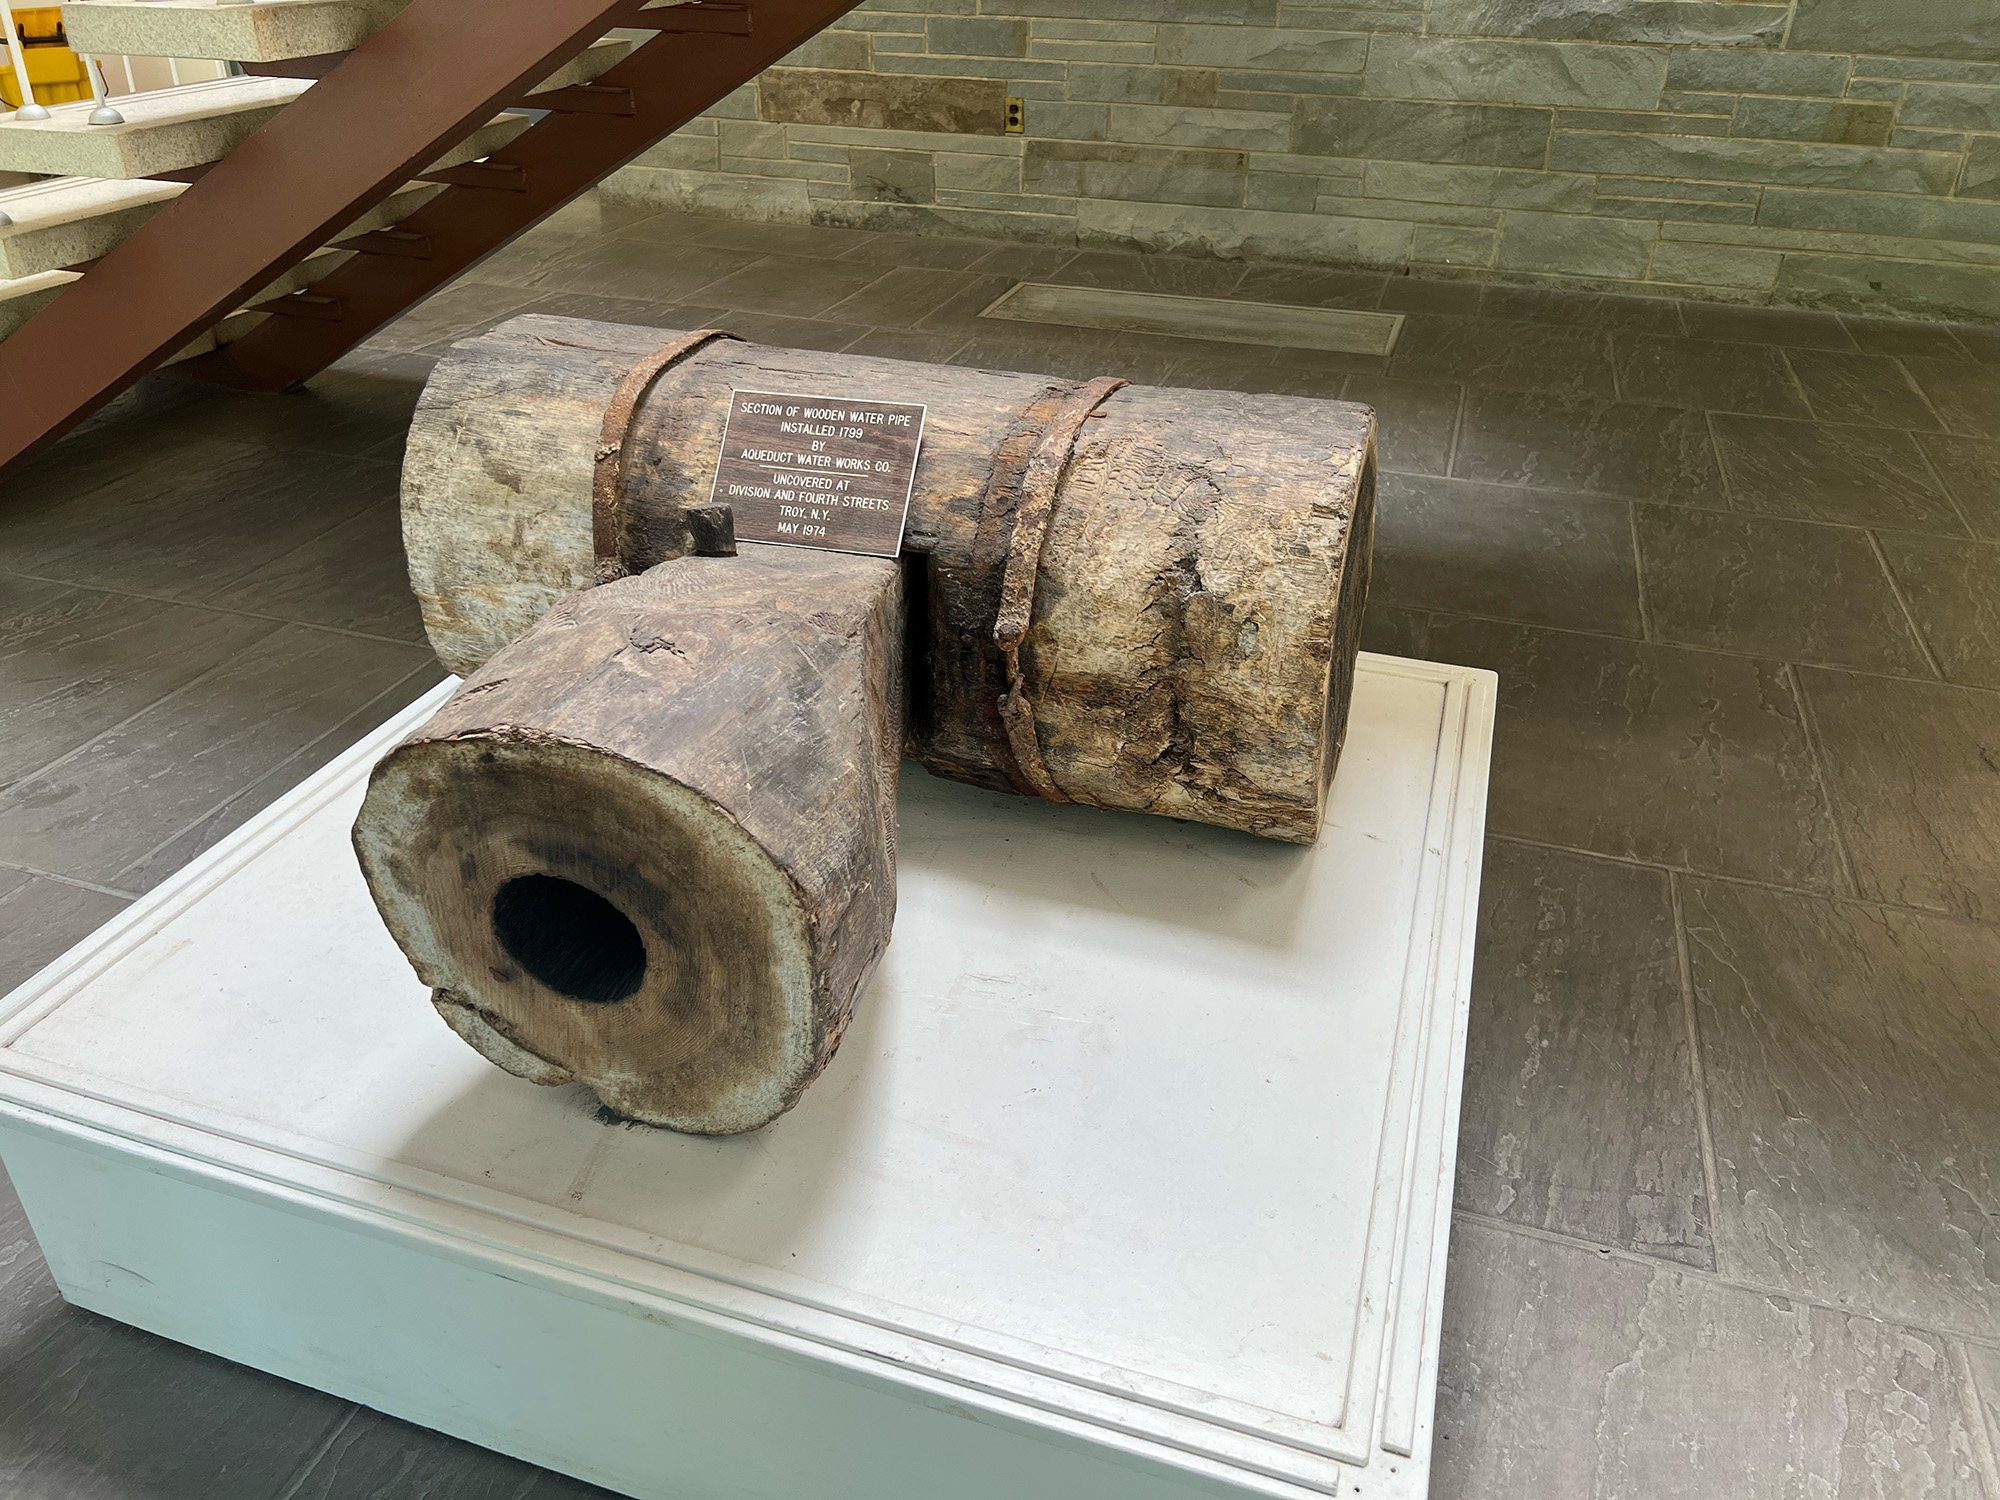 A very old water pipe joint is mounted on a square platform in the lobby of the water plant. There is a small plaque on top of the pipe.